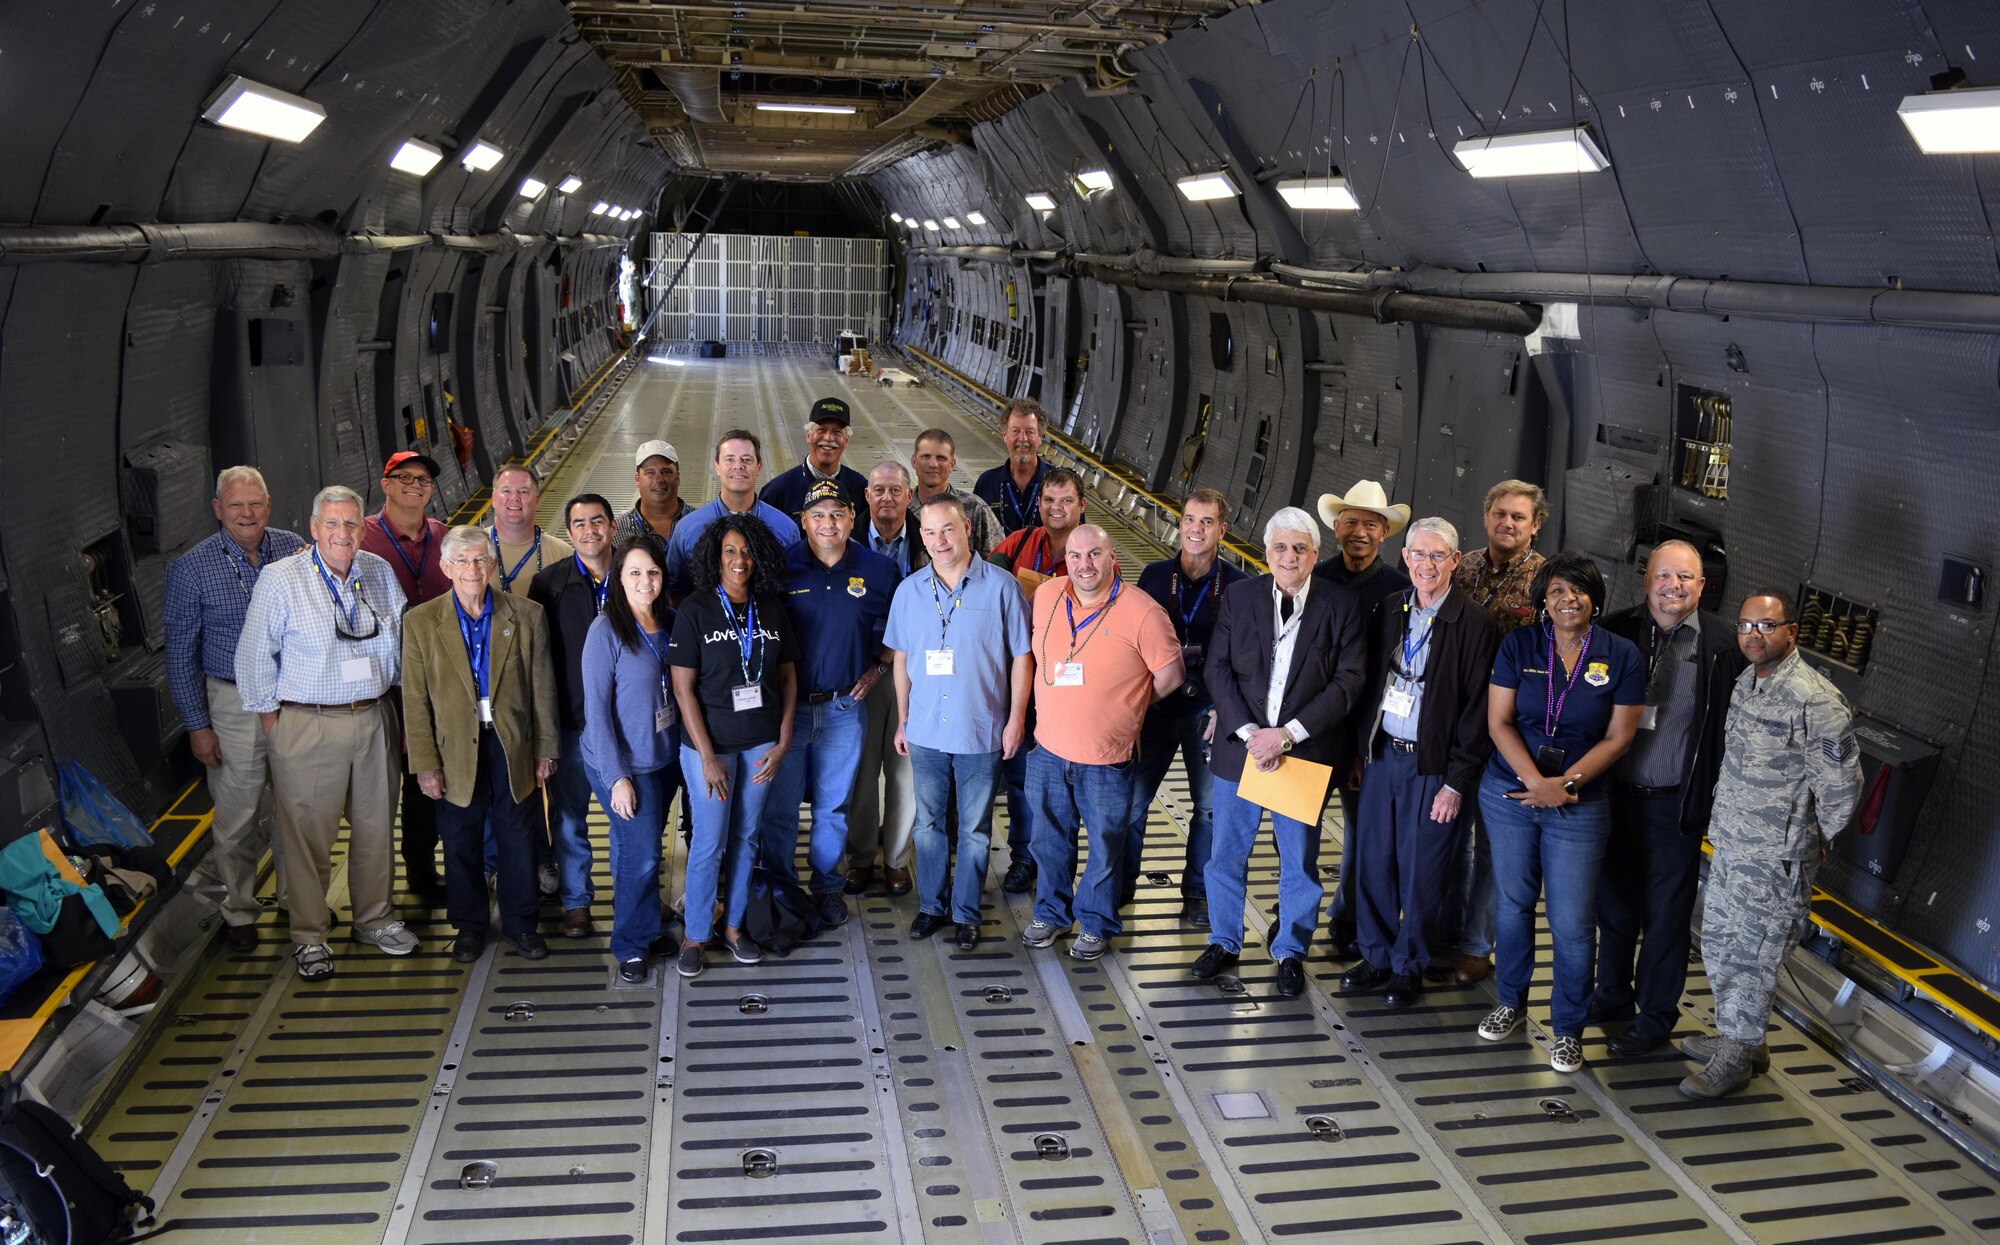 Civic leaders within San Antonio and its surrounding communities pose for a photo in the cargo bay of a C-5M Super Galaxy Oct. 28, 2016 on the Joint Base San Antonio-Lackland, Texas, flight line after returning home from a two-day tour of Barksdale Air Force Base, Louisiana. (U.S. Air Force photo by Tech. Sgt. Lindsey Maurice)  